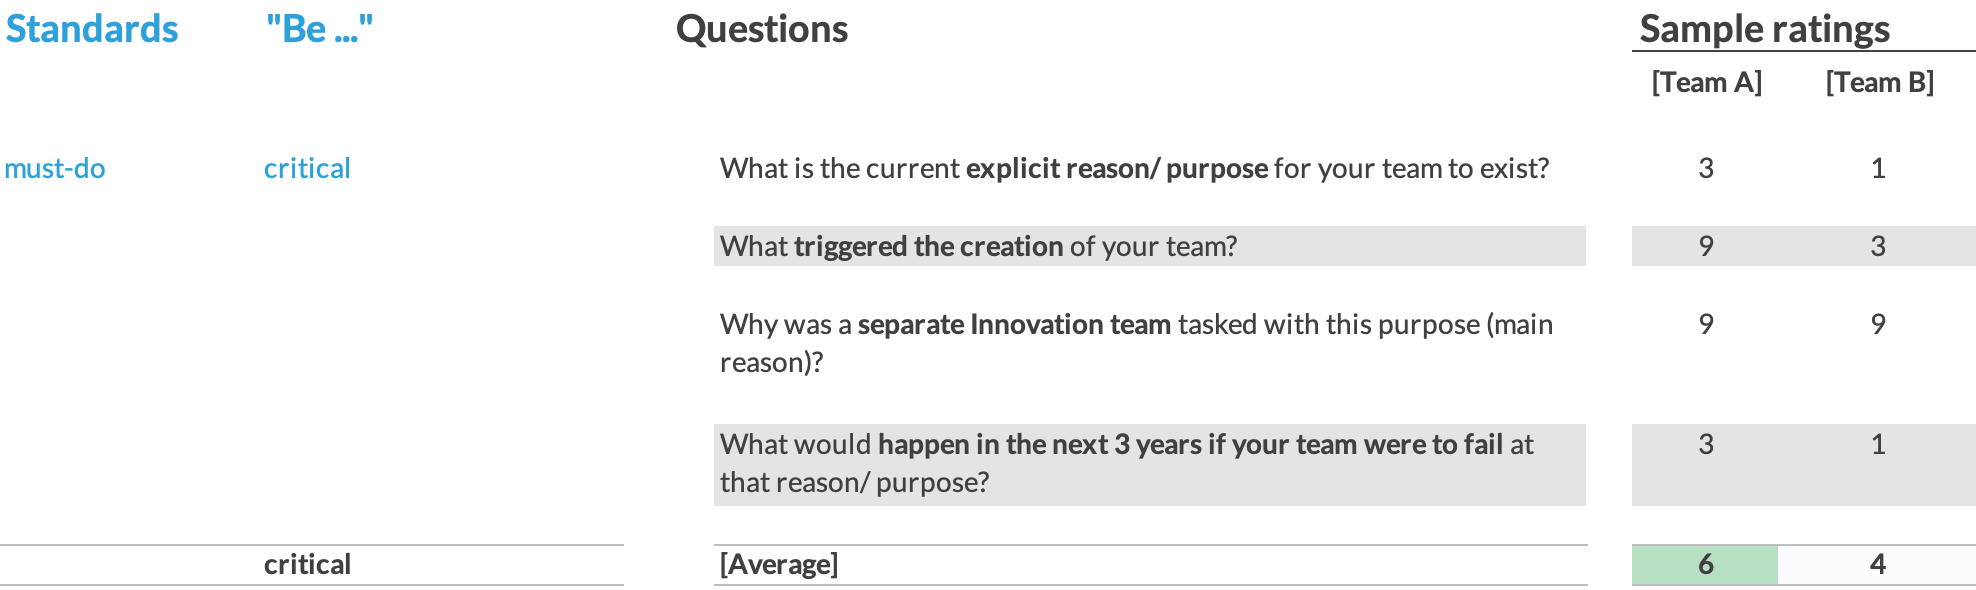 A partial view of a questionnaire, with answers for two sample Innovation teams